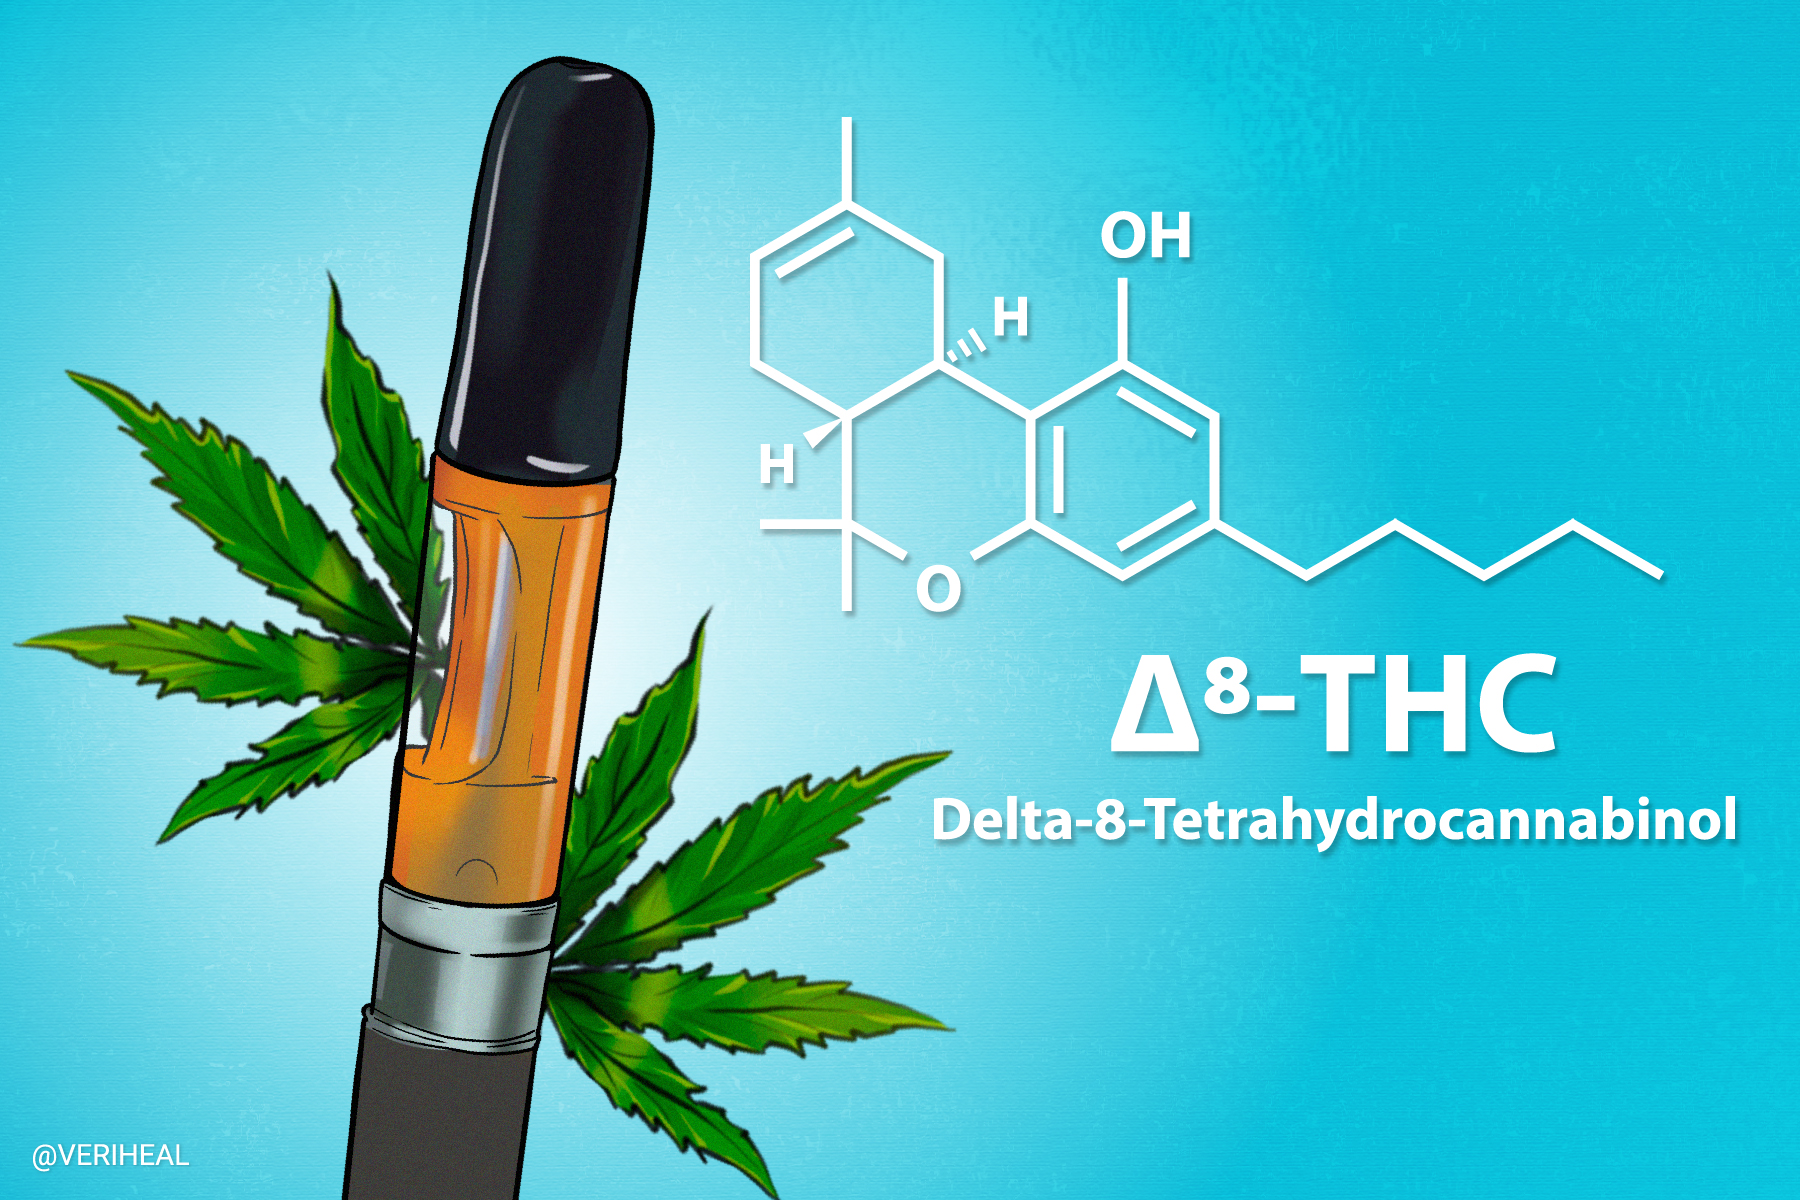 WHAT STATES IS DELTA 8 THC LEGAL - Gummies|Thc|Products|Hemp|Product|Brand|Effects|Delta|Gummy|Cbd|Origin|Quality|Dosage|Delta-8|Dose|Usasource|Flavors|Brands|Ingredients|Range|Customers|Edibles|Cartridges|Reviews|Side|List|Health|Cannabis|Lab|Customer|Options|Benefits|Overviewproducts|Research|Time|Market|Drug|Farms|Party|People|Delta-8 Thc|Delta-8 Products|Delta-9 Thc|Delta-8 Gummies|Delta-8 Thc Products|Delta-8 Brands|Customer Reviews|Brand Overviewproducts|Drug Tests|Free Shipping|Similar Benefits|Vape Cartridges|Hemp Doctor|United States|Third Party Lab|Drug Test|Thc Edibles|Health Canada|Cannabis Plant|Side Effects|Organic Hemp|Diamond Cbd|Reaction Time|Legal Hemp|Psychoactive Effects|Psychoactive Properties|Third Party|Dry Eyes|Delta-8 Market|Tolerance Level